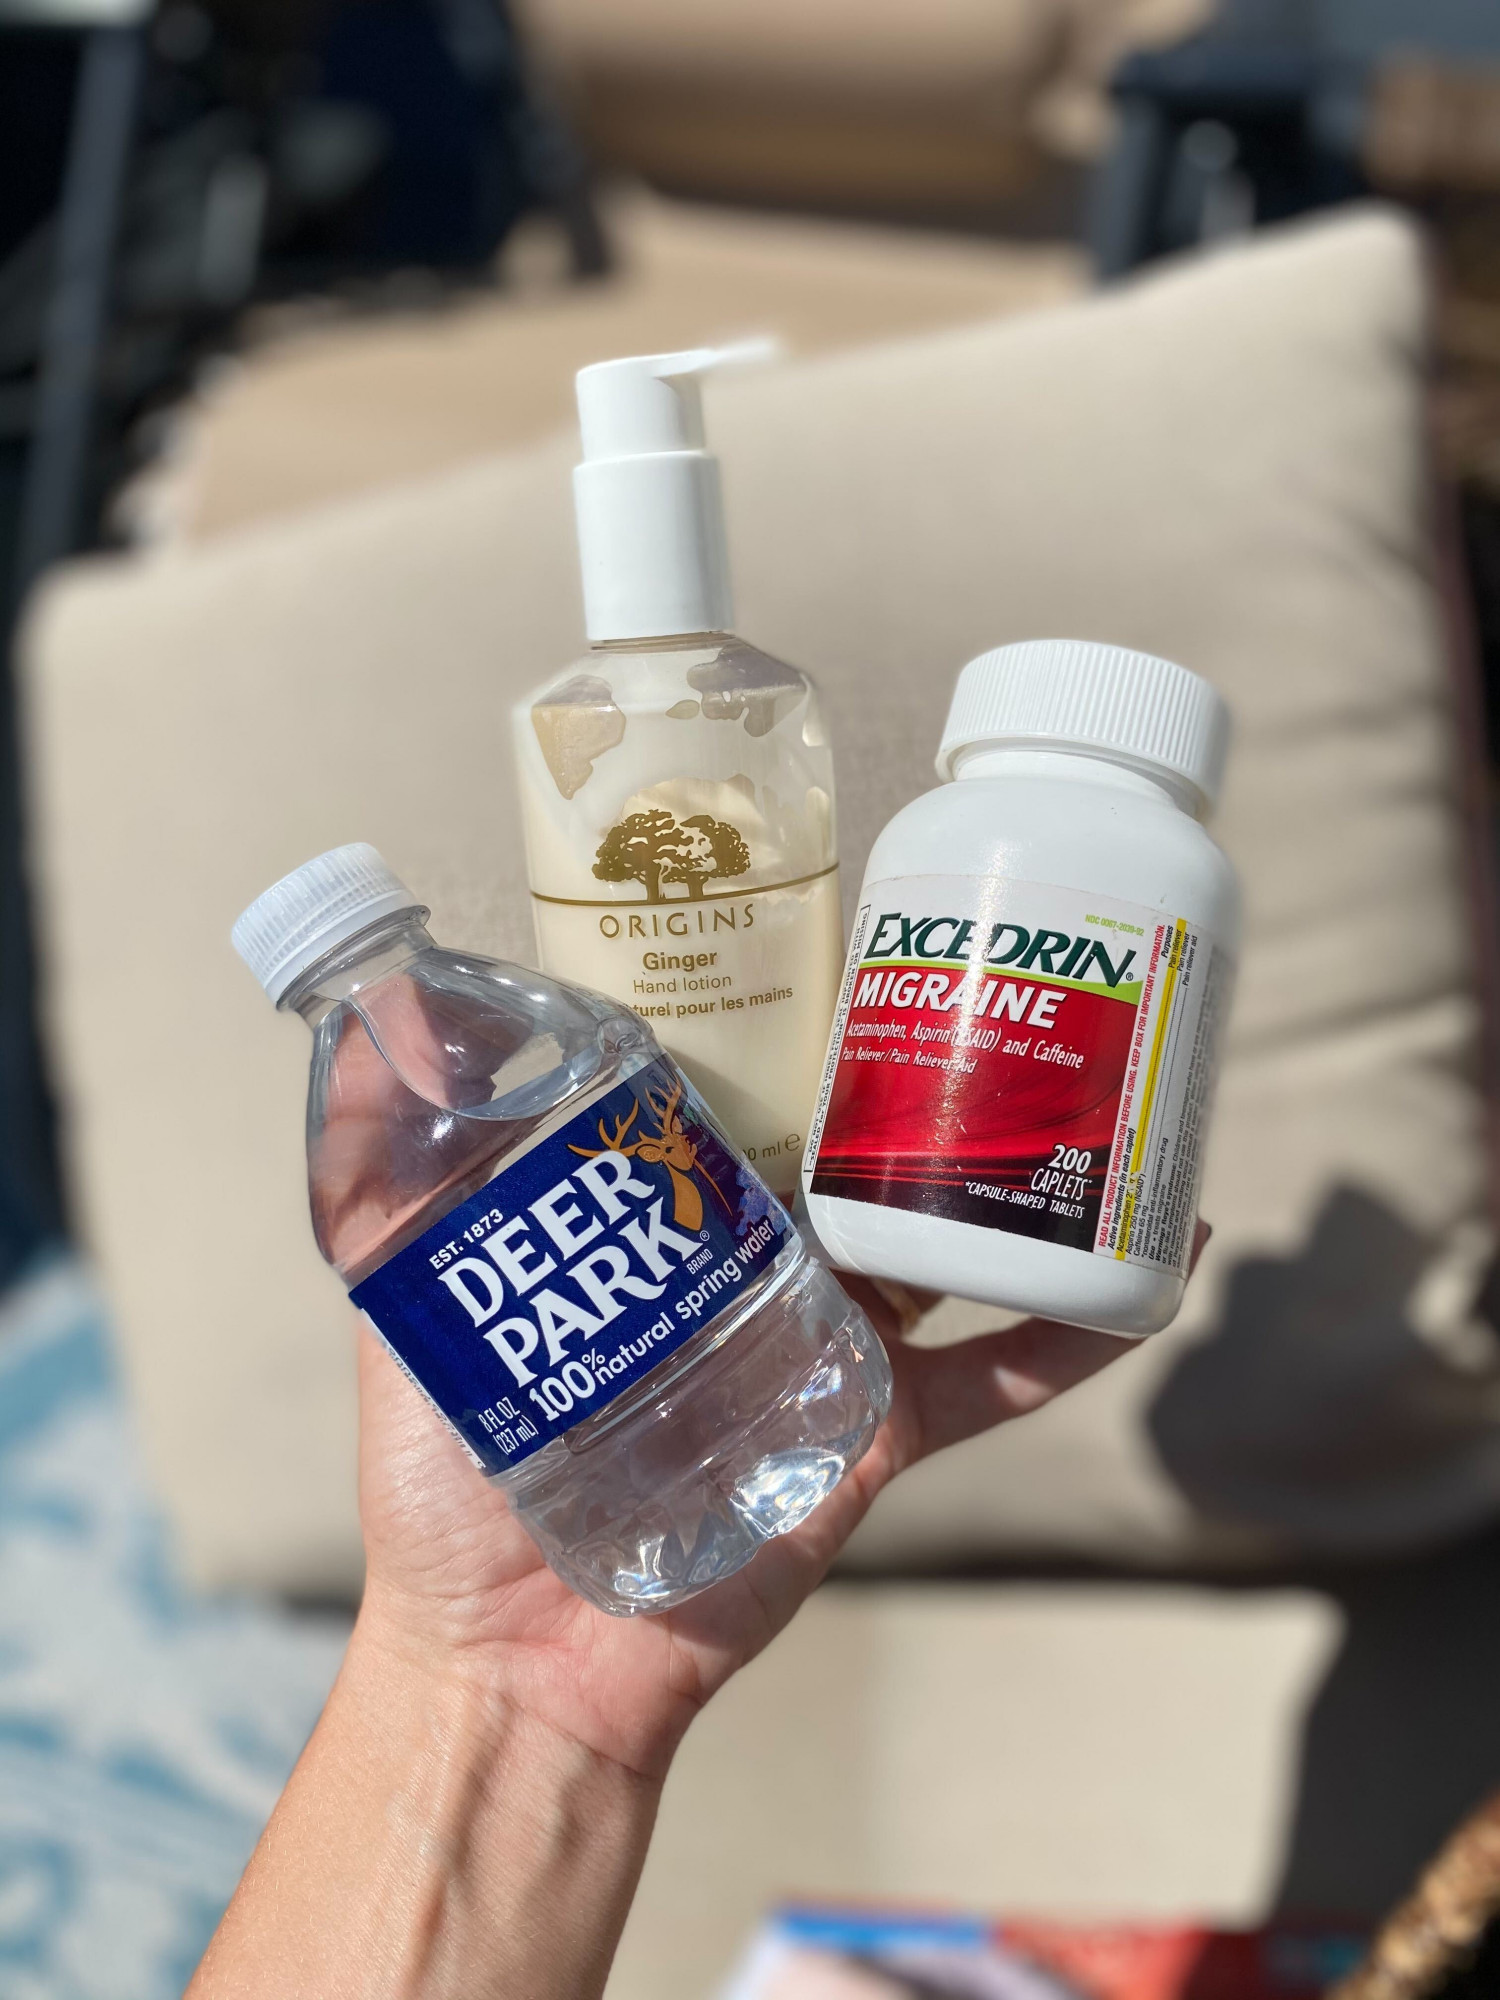 Water, lotion, and Excedrin to relieve migraines